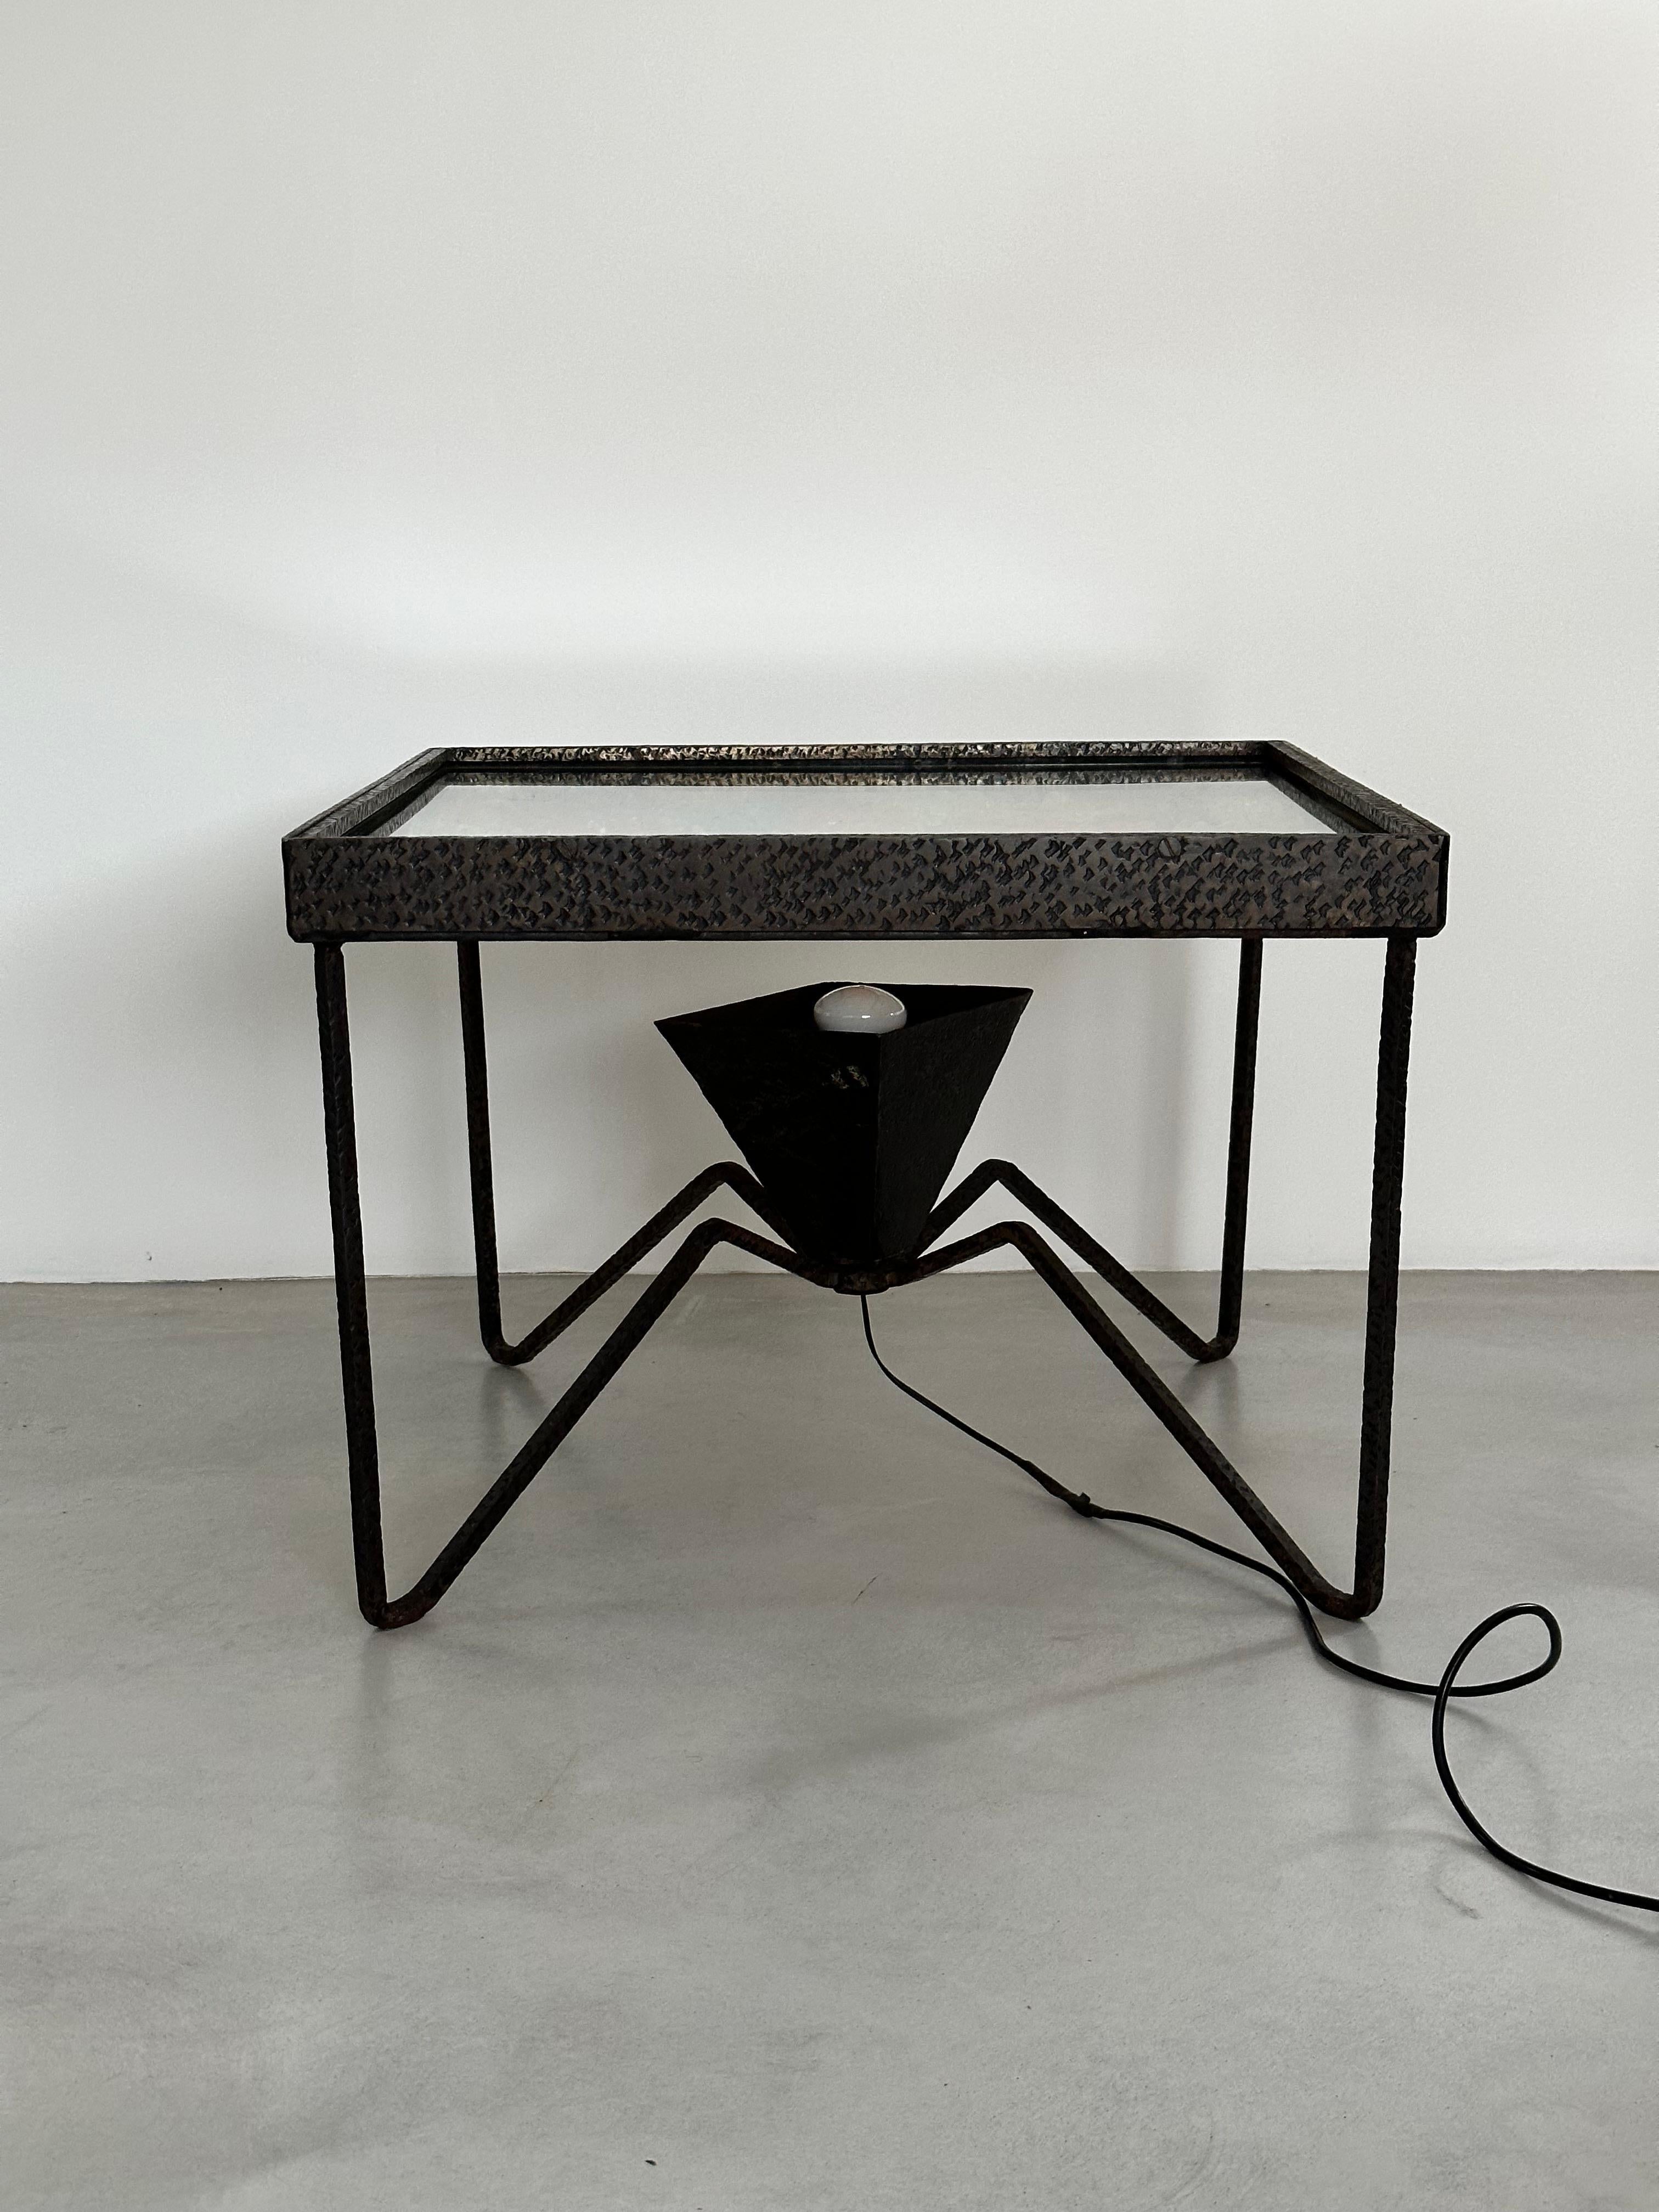 André Kulesza Architect. Unique Light Table, Wrought Iron, Glass Crystals 1960s For Sale 8